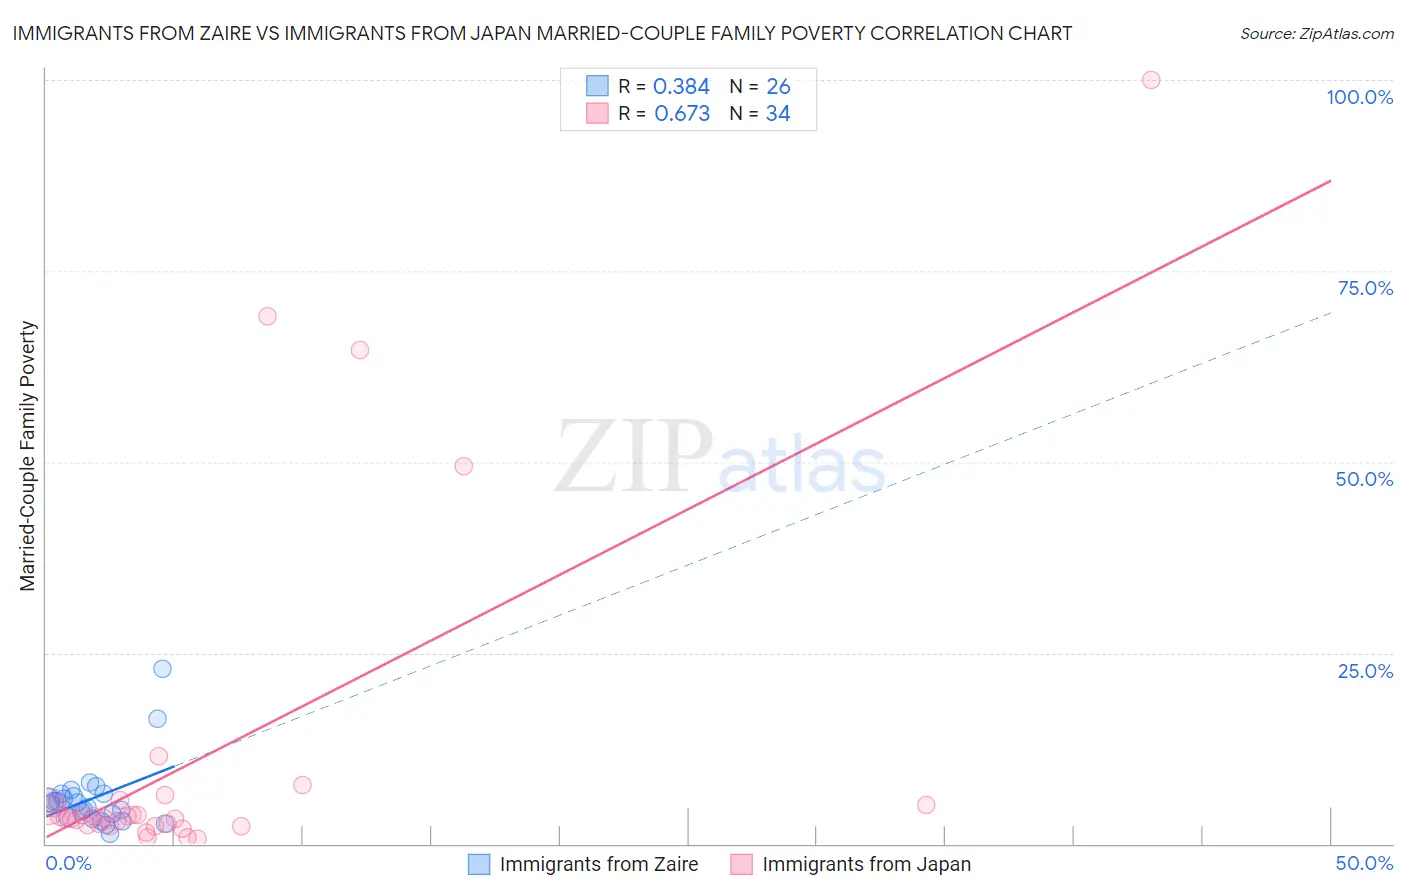 Immigrants from Zaire vs Immigrants from Japan Married-Couple Family Poverty